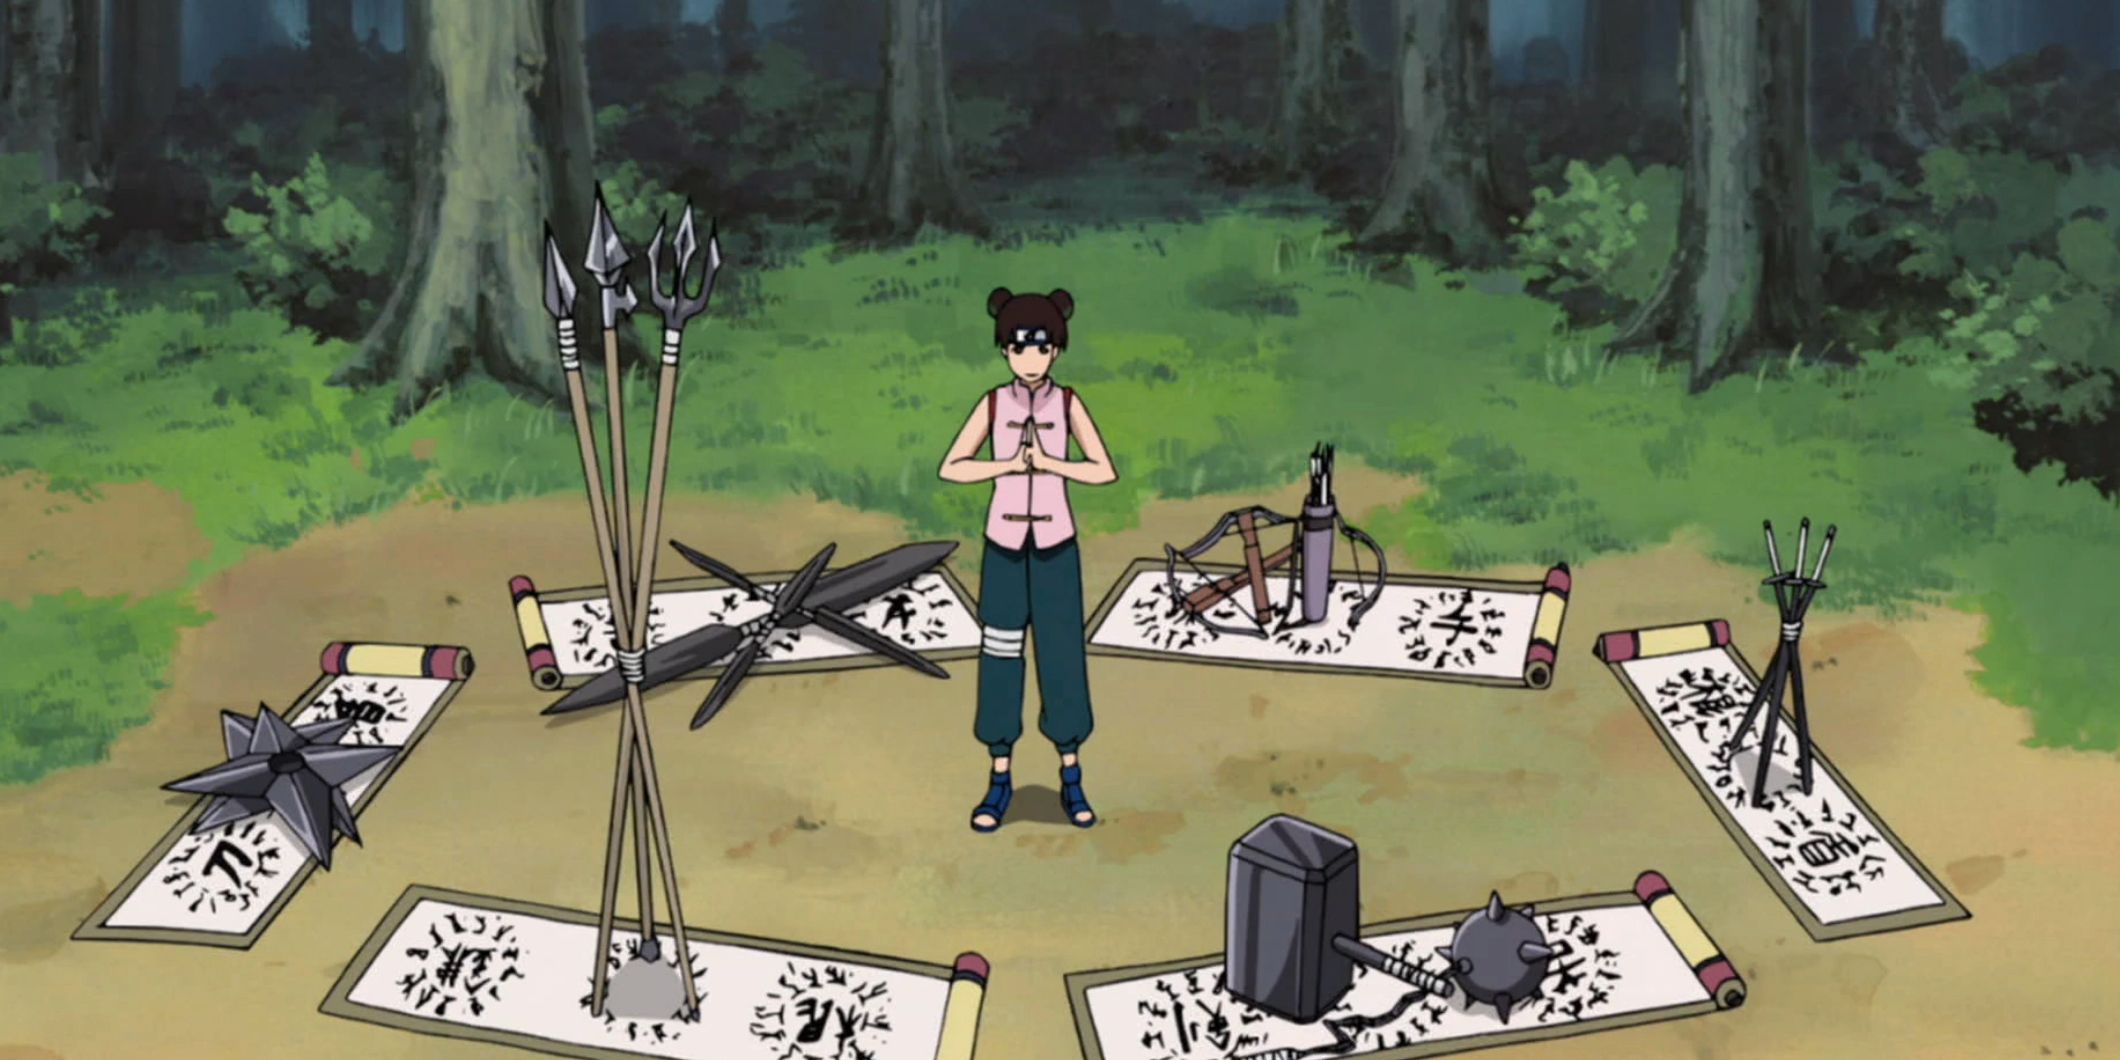 Tenten is surrounded by her weapons and scrolls in Naruto